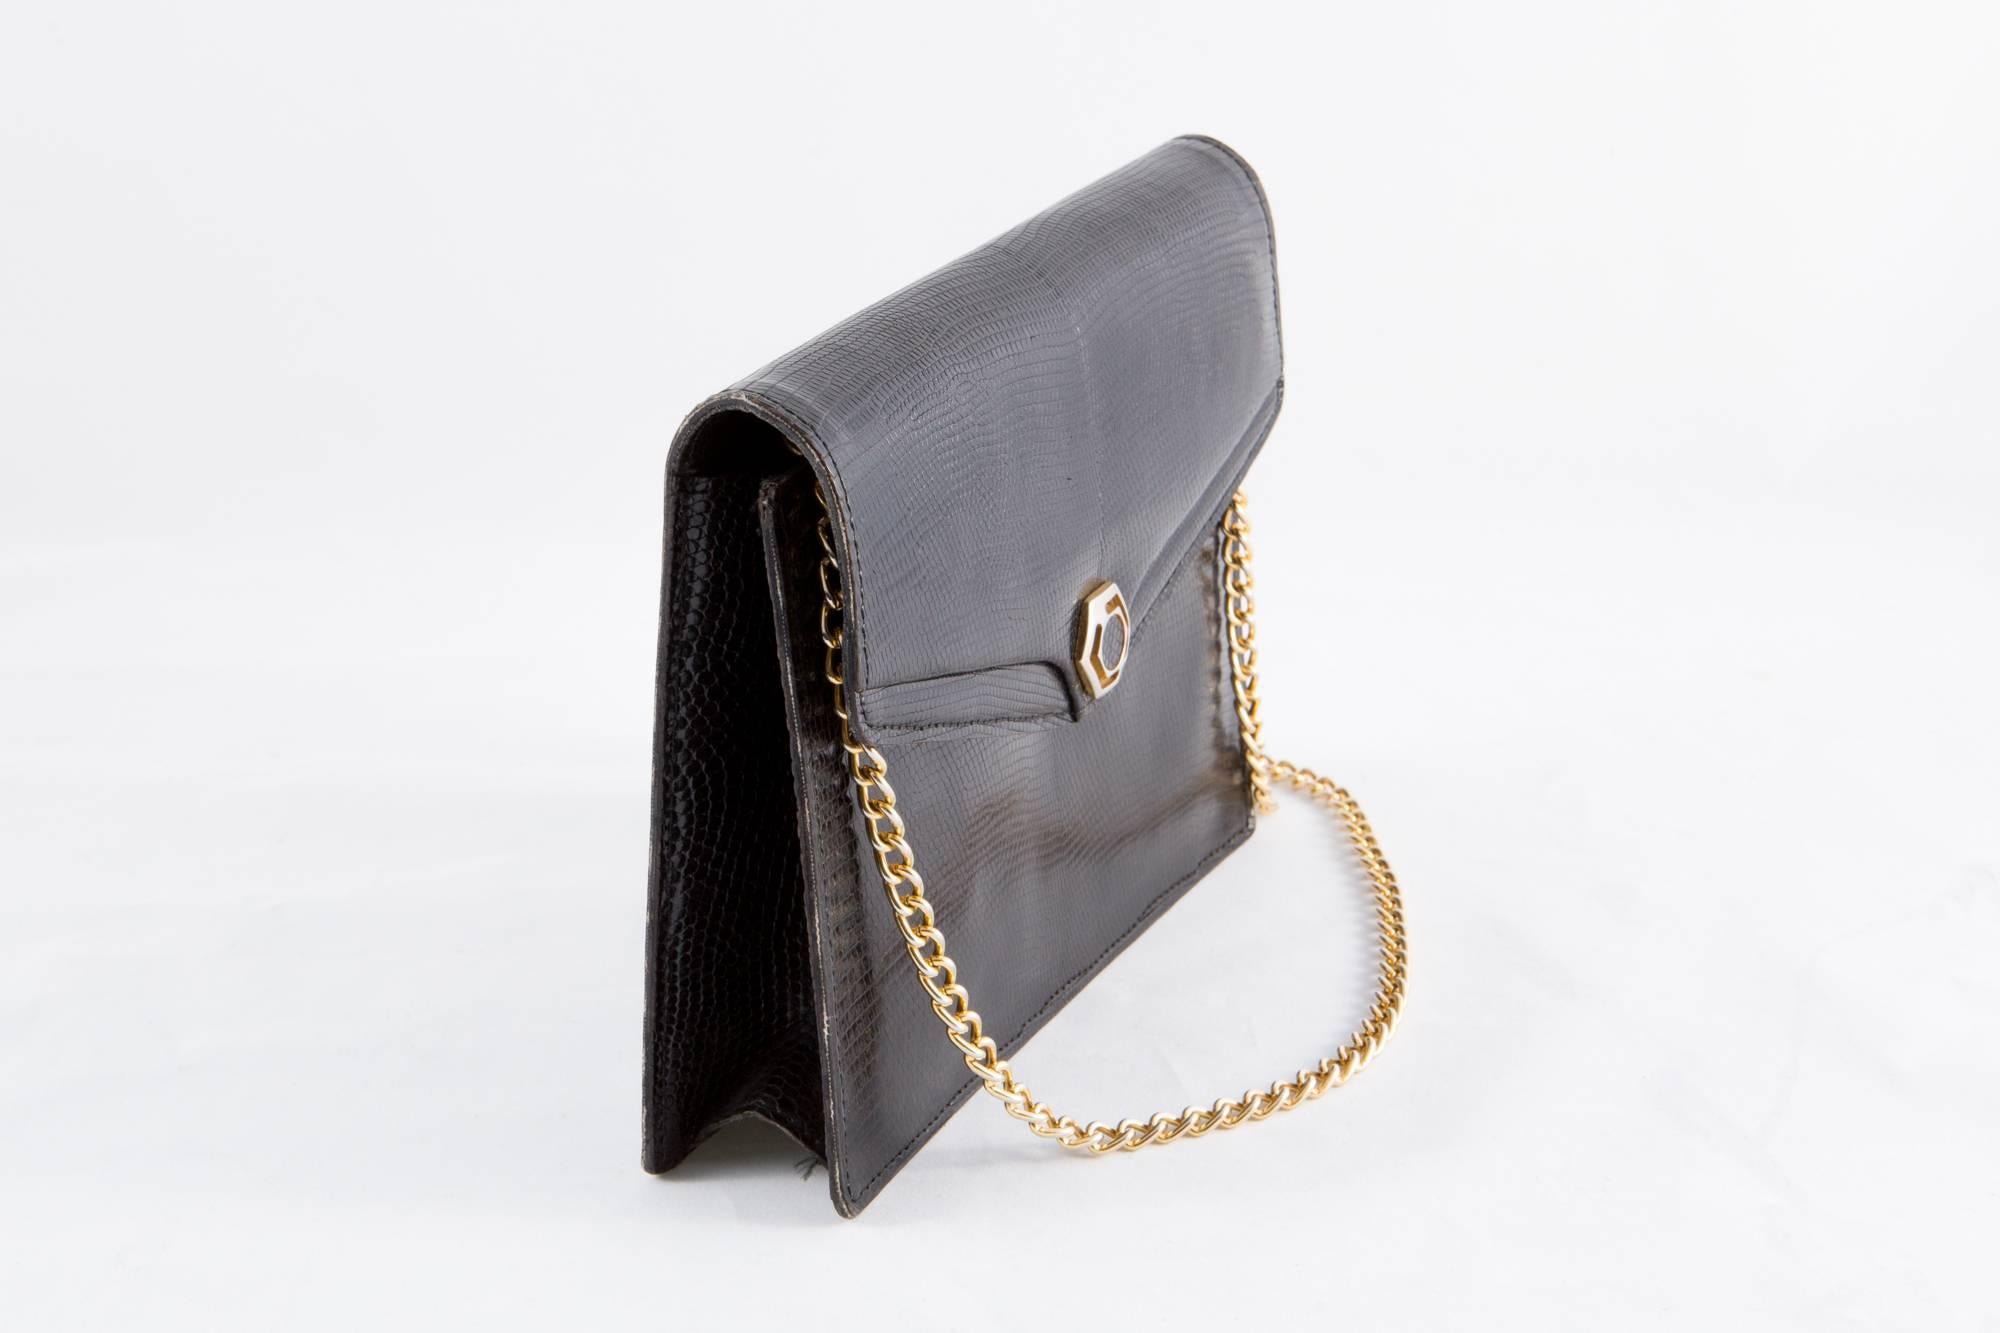 1960s black evening bag featuring a lizard effect leather outside, an inside black leather lining, a detachable gold tone shoulder chain, a front snap closure, inside 2 small pockets. 
In good vintage condition. Made in France.
Measurements: 7,4in.